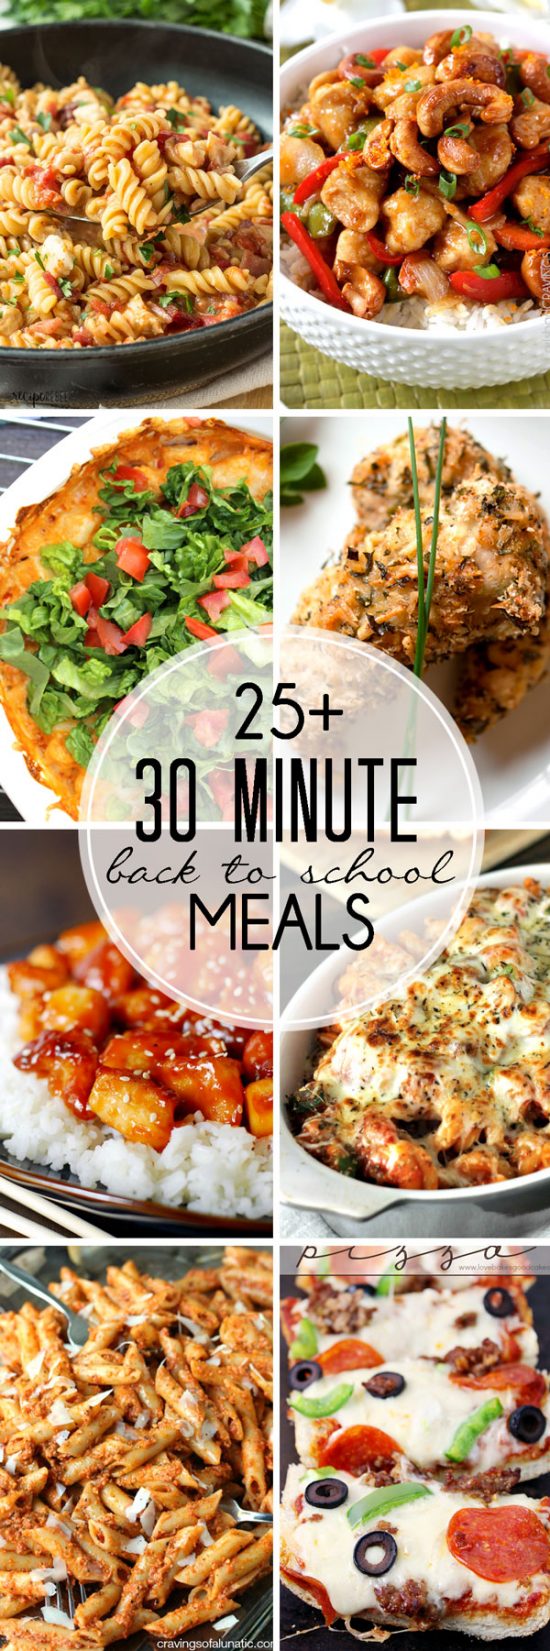 25+ 30 minute meals - These recipes are perfect for back to school dinners! | The Love Nerds